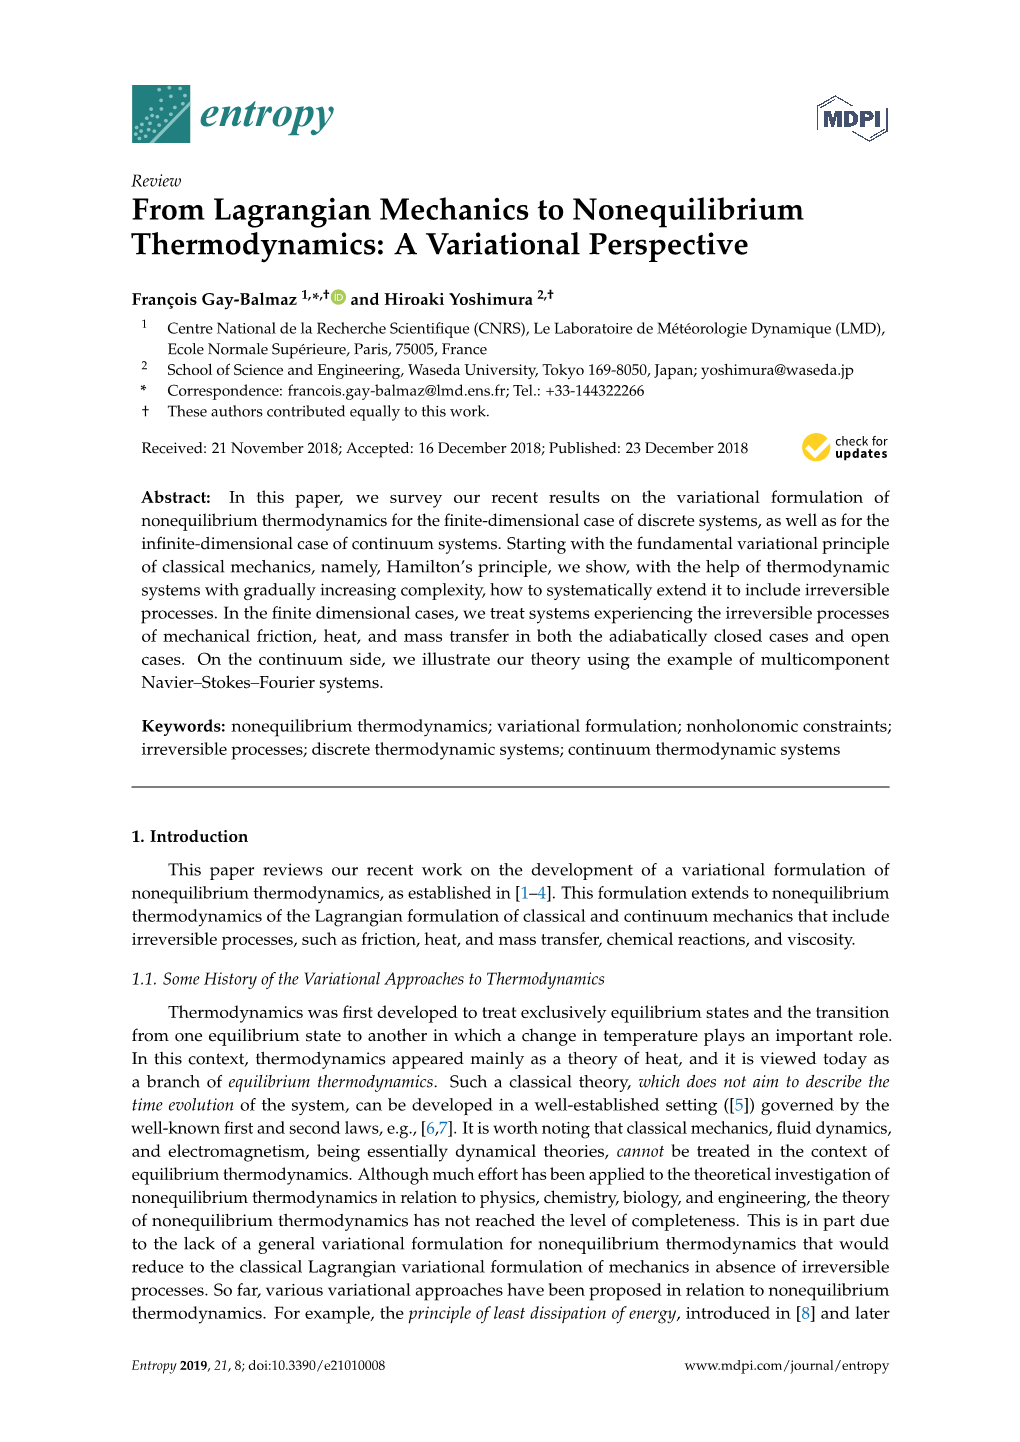 From Lagrangian Mechanics to Nonequilibrium Thermodynamics: a Variational Perspective